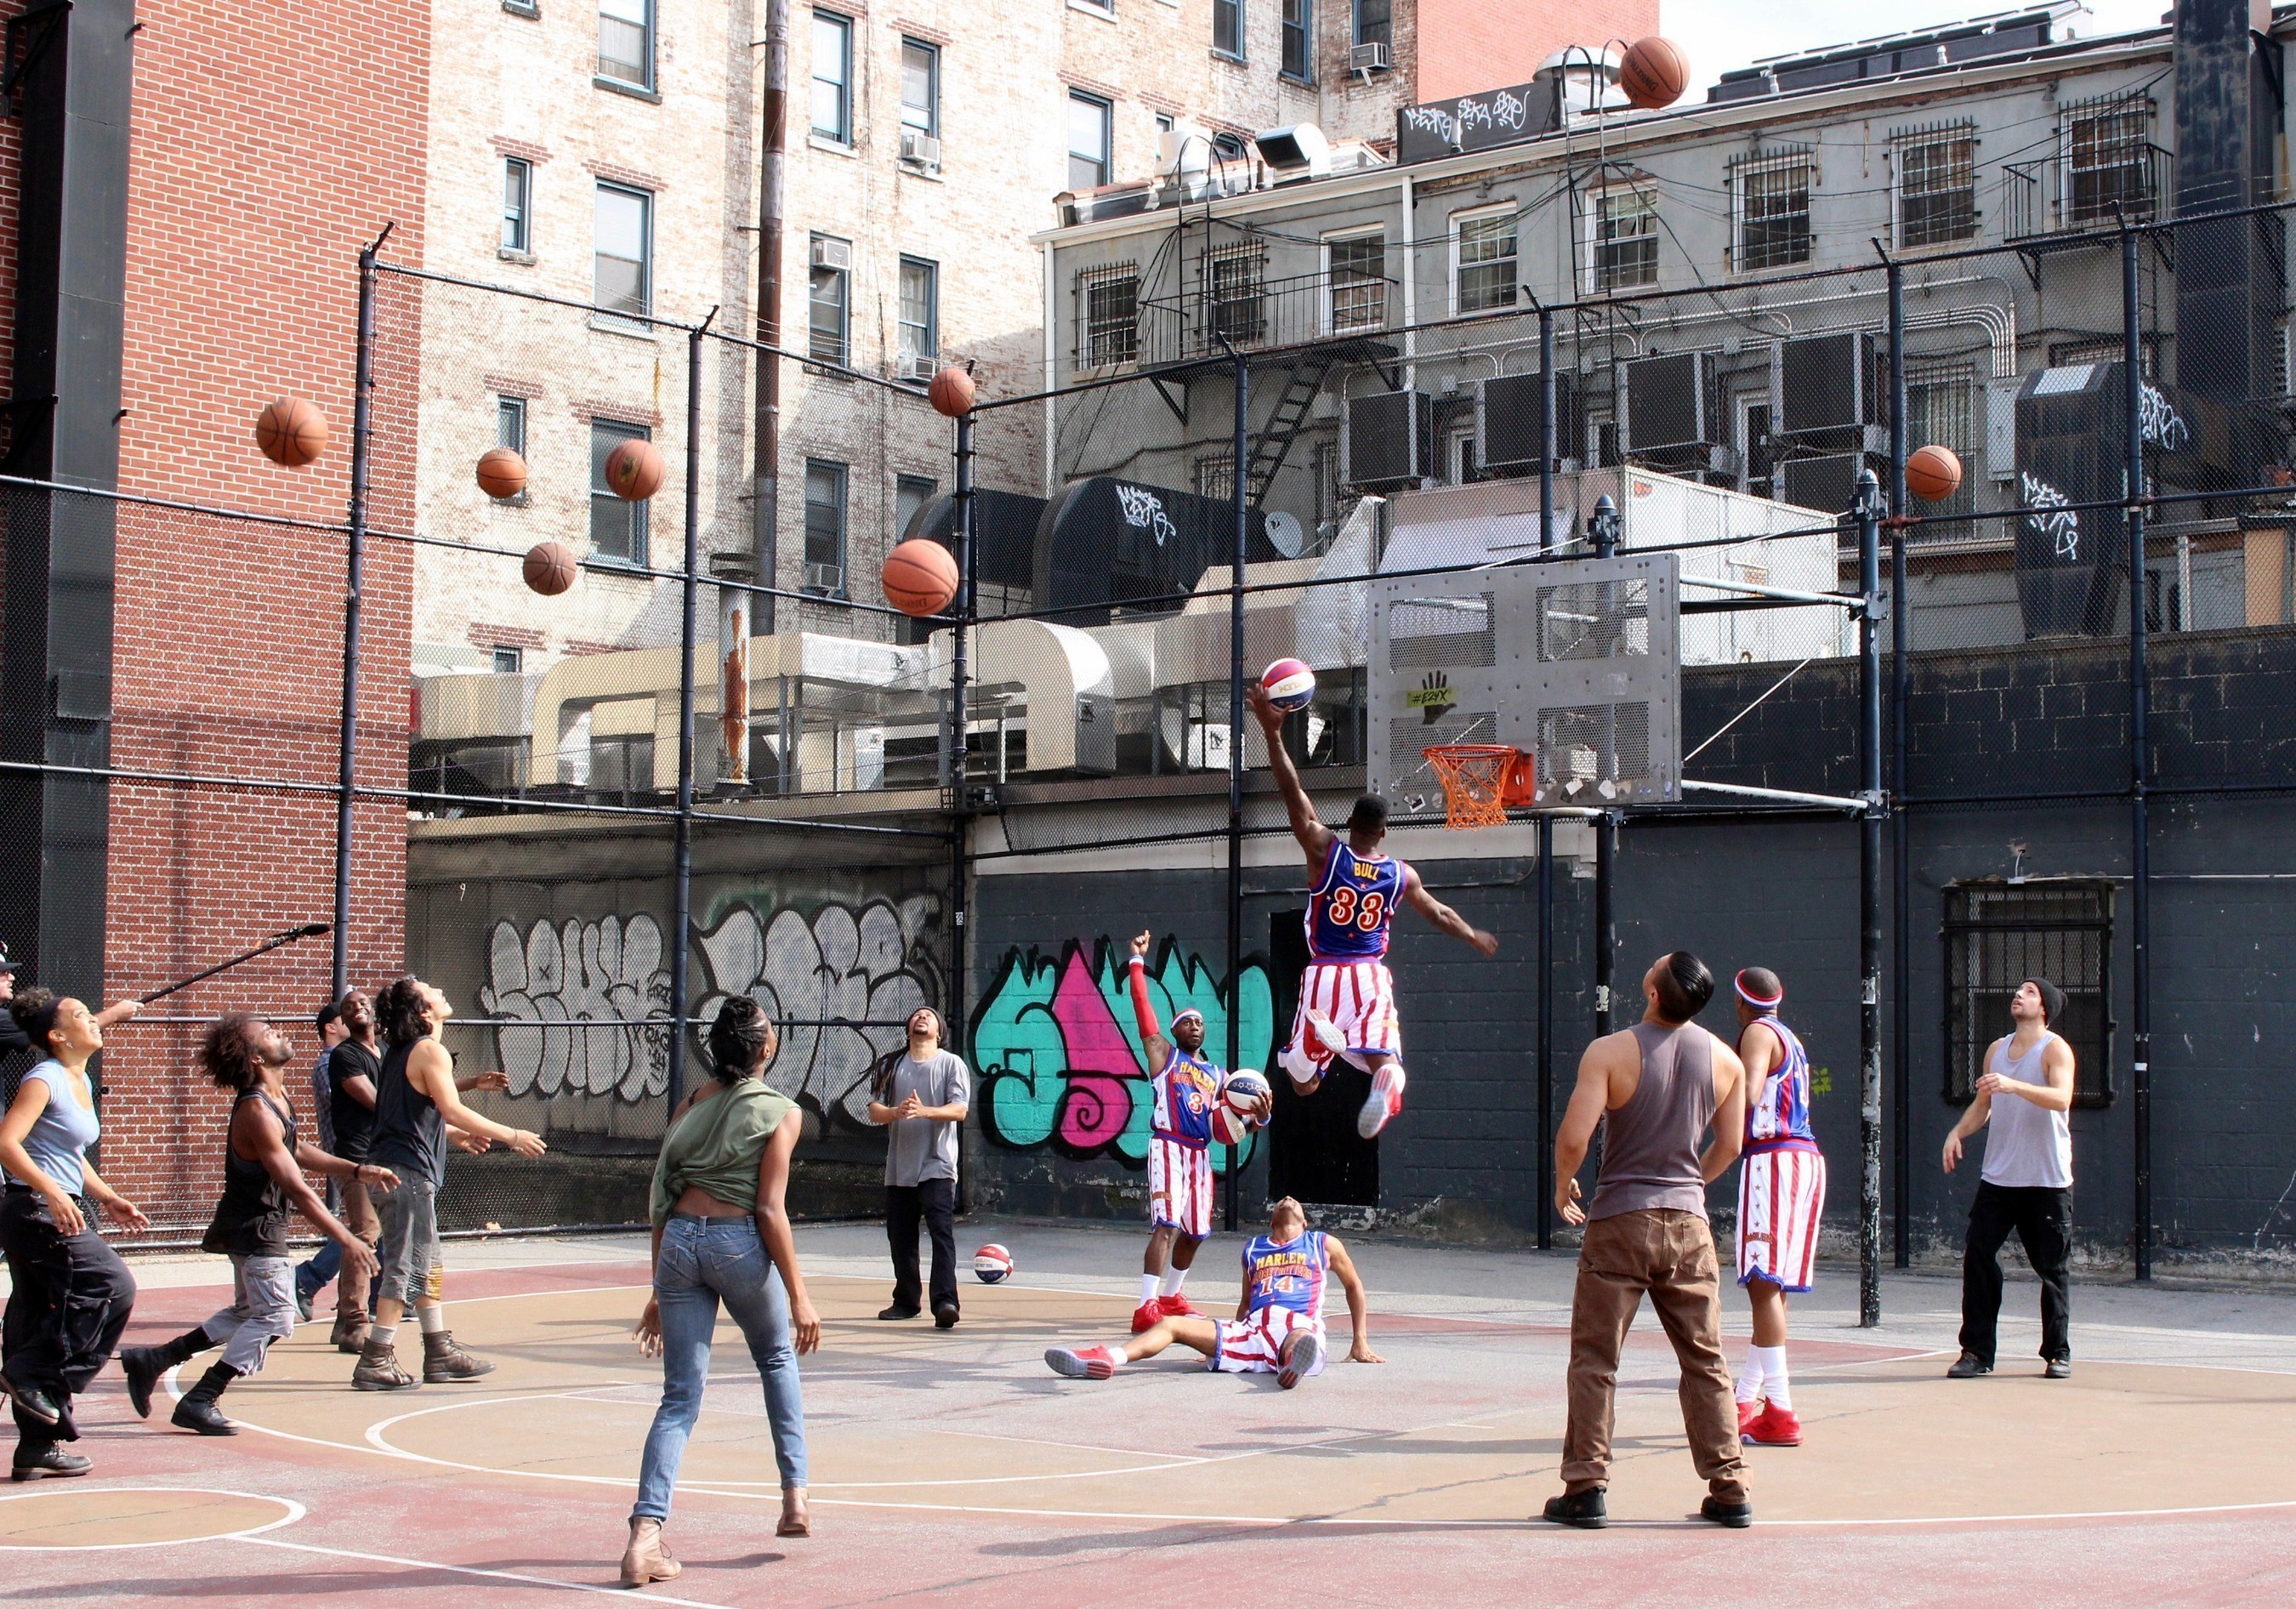 The Harlem Globetrotters and the group STOMP took to an outdoor basketball court in New York City's Greenwich Village to celebrate the Globetrotters' 90th year.